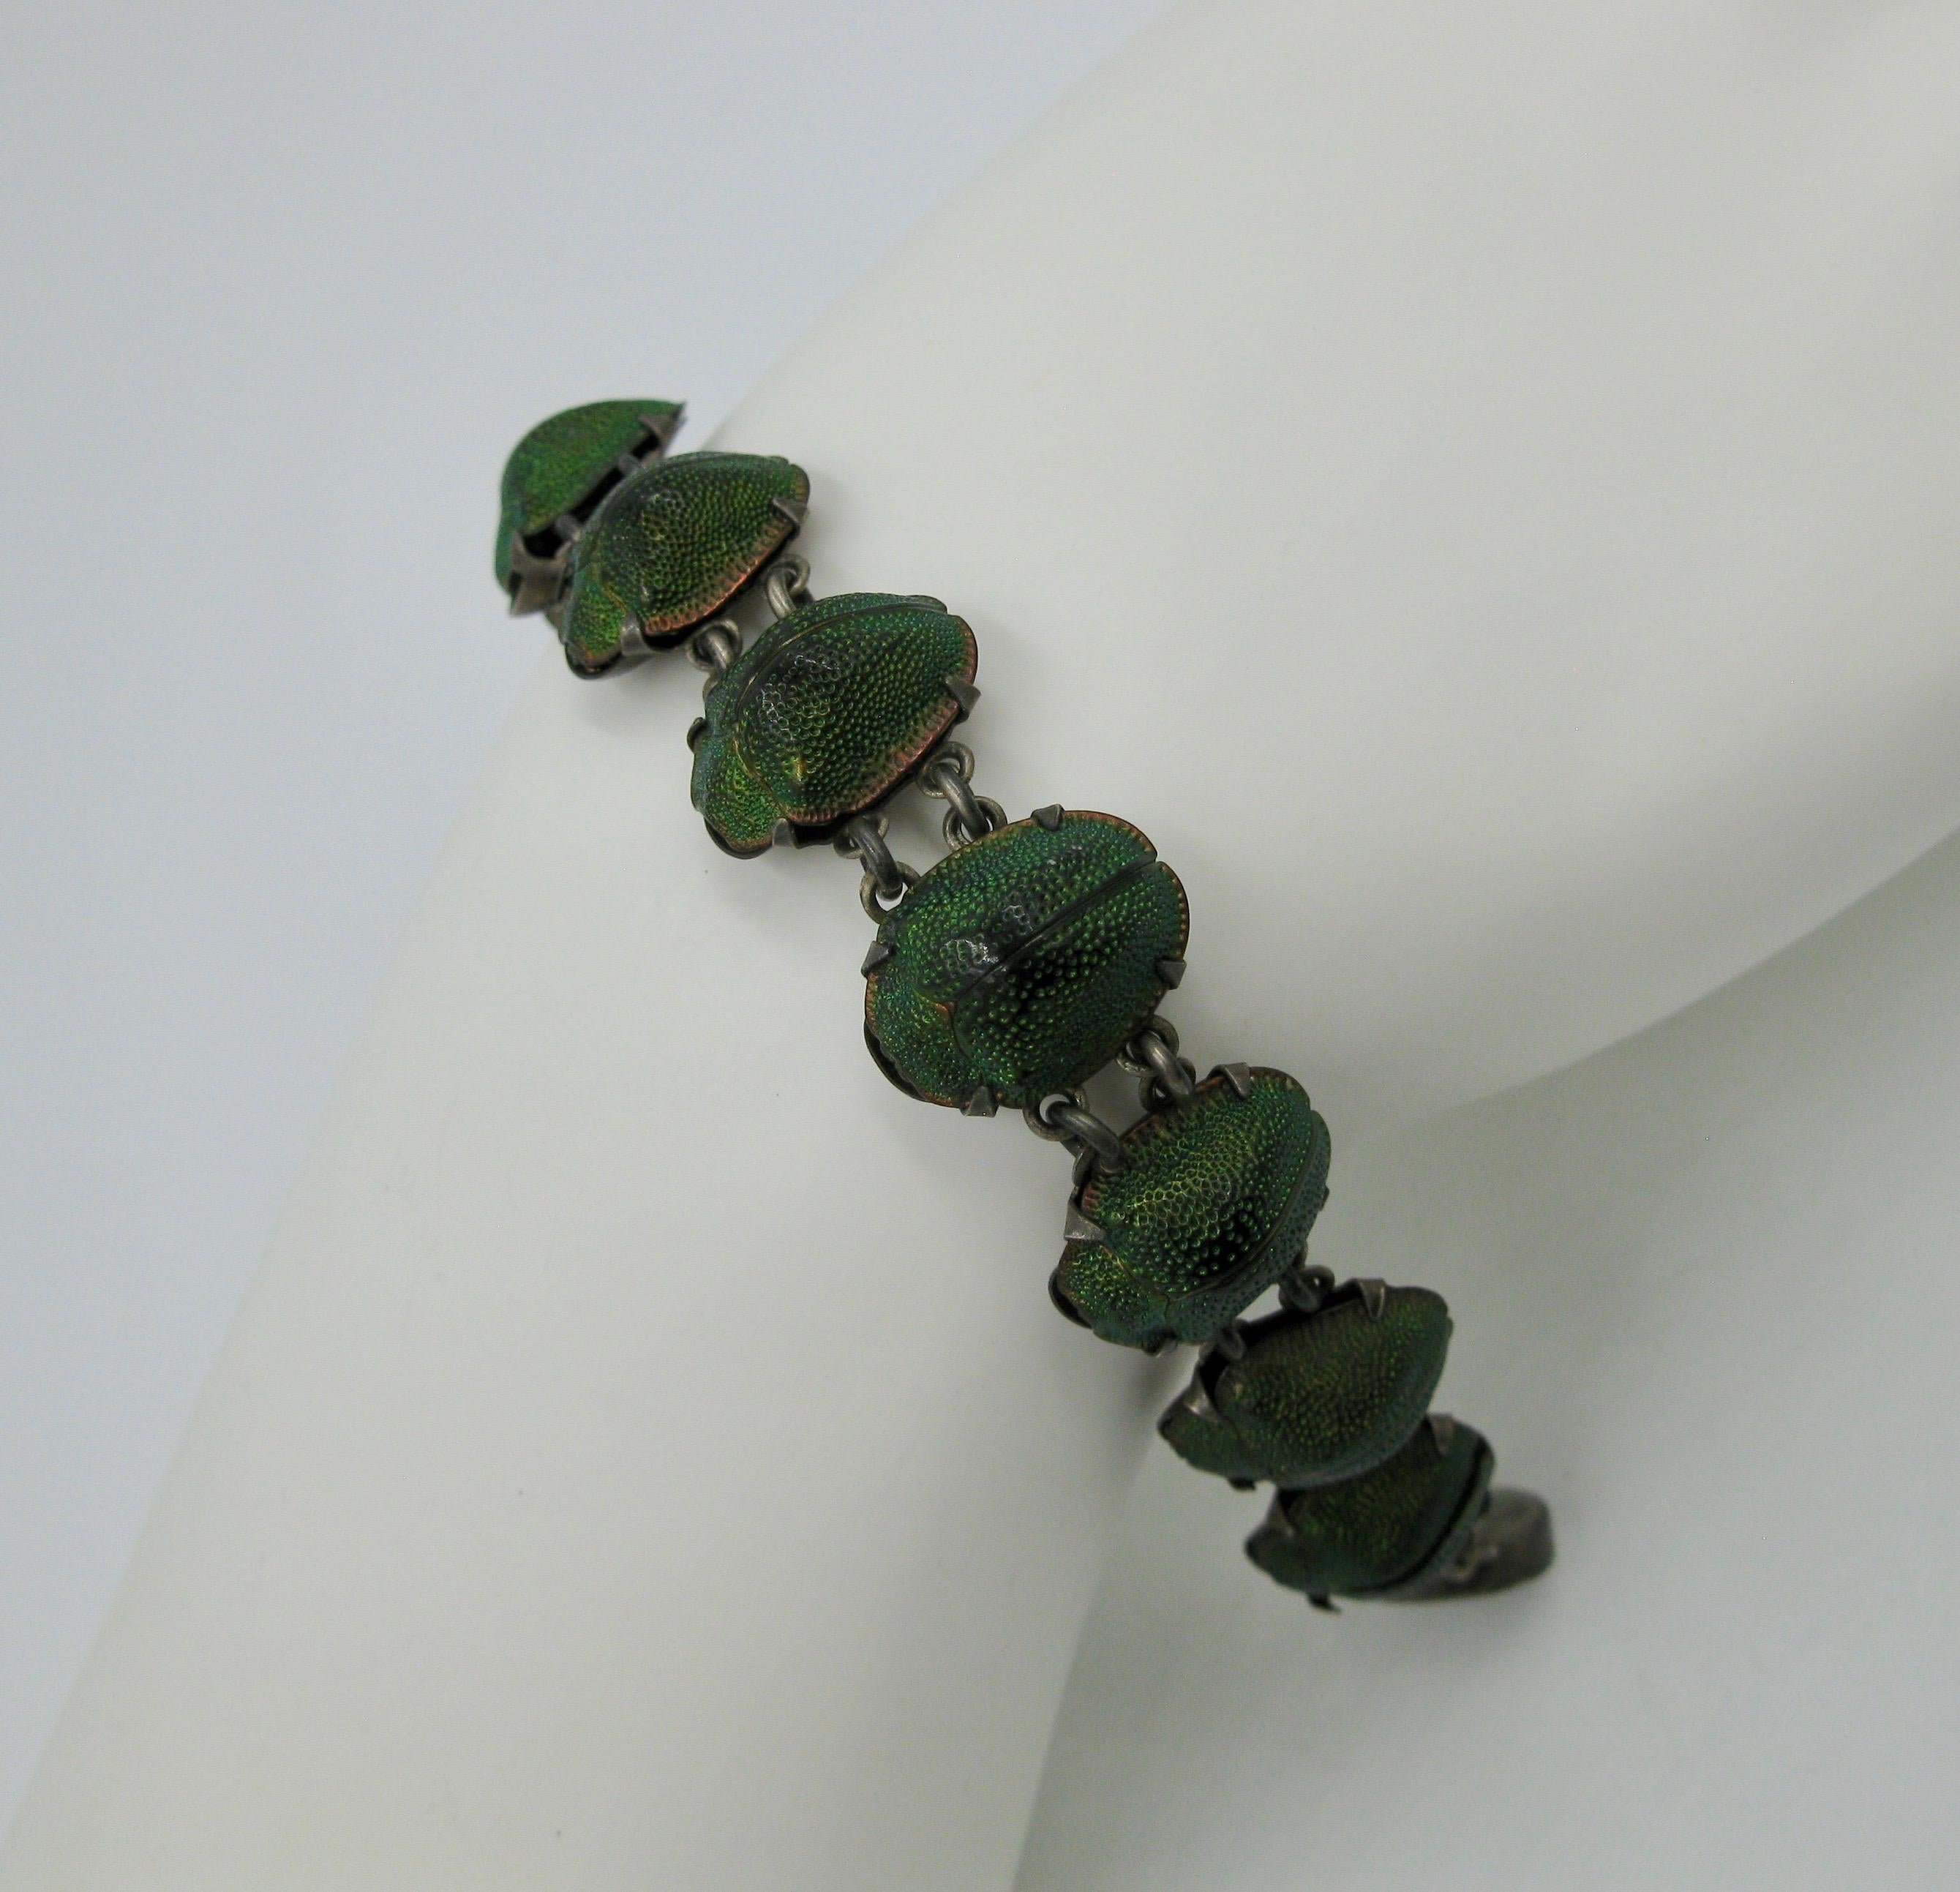 This is a very rare and wonderful antique Victorian Egyptian Revival Bracelet with 11 Natural Iridescent Green Scarab Beetles set in Sterling Silver. The jewel an Egyptian Revival piece dating to circa 1860 - 1930.  Very rare to find these bracelets